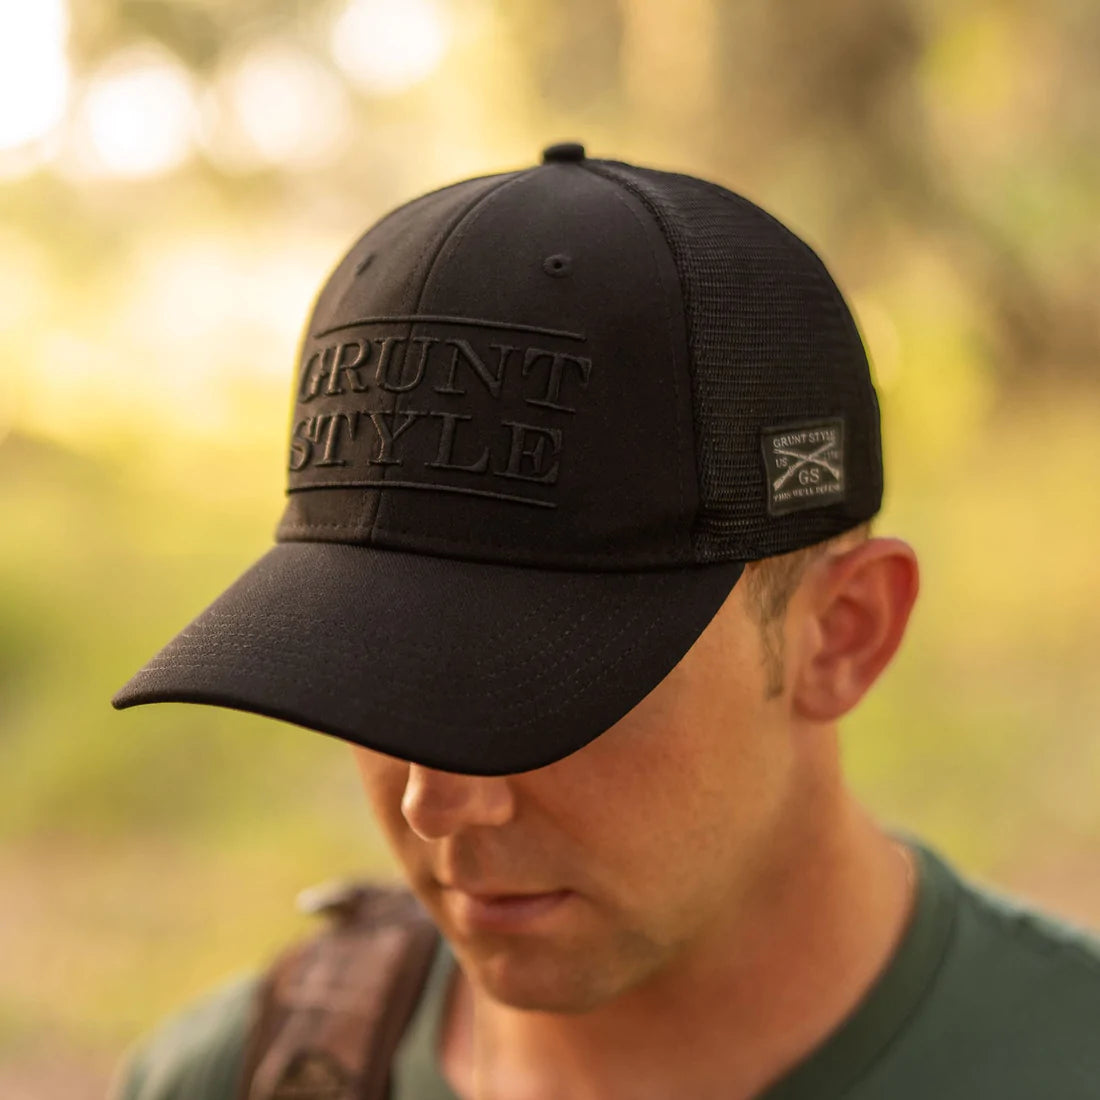 GS Stacked Logo Black Hat